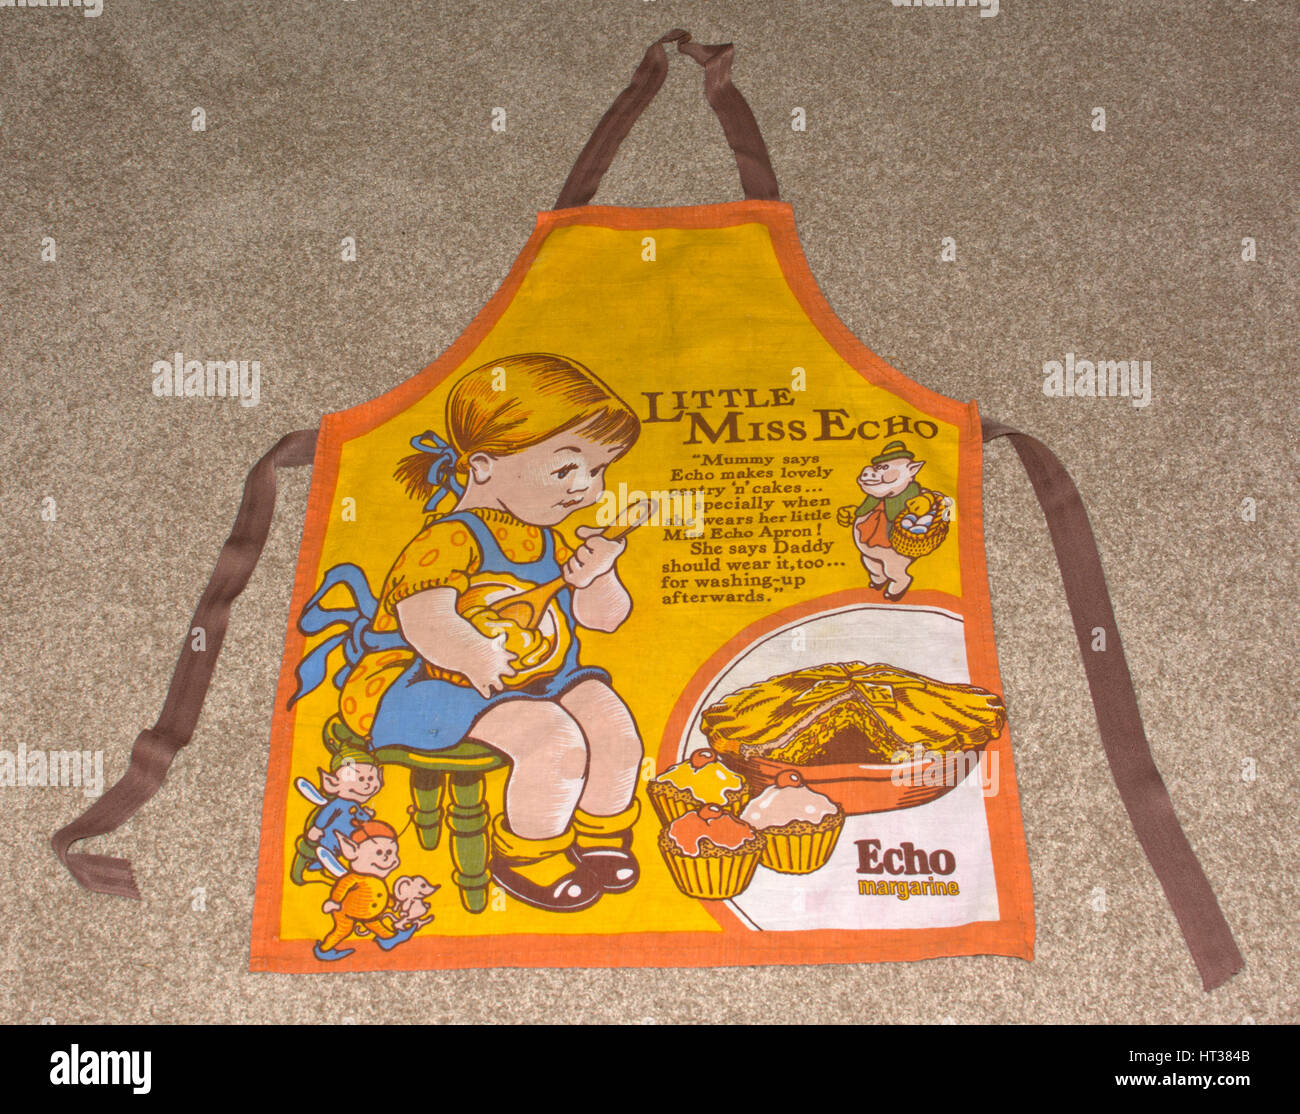 Little Miss Echo margarine apron. 'Mummy says Echo makes lovely pastry 'n' cakes, specially when she wears her little Miss Echo apron! Stock Photo